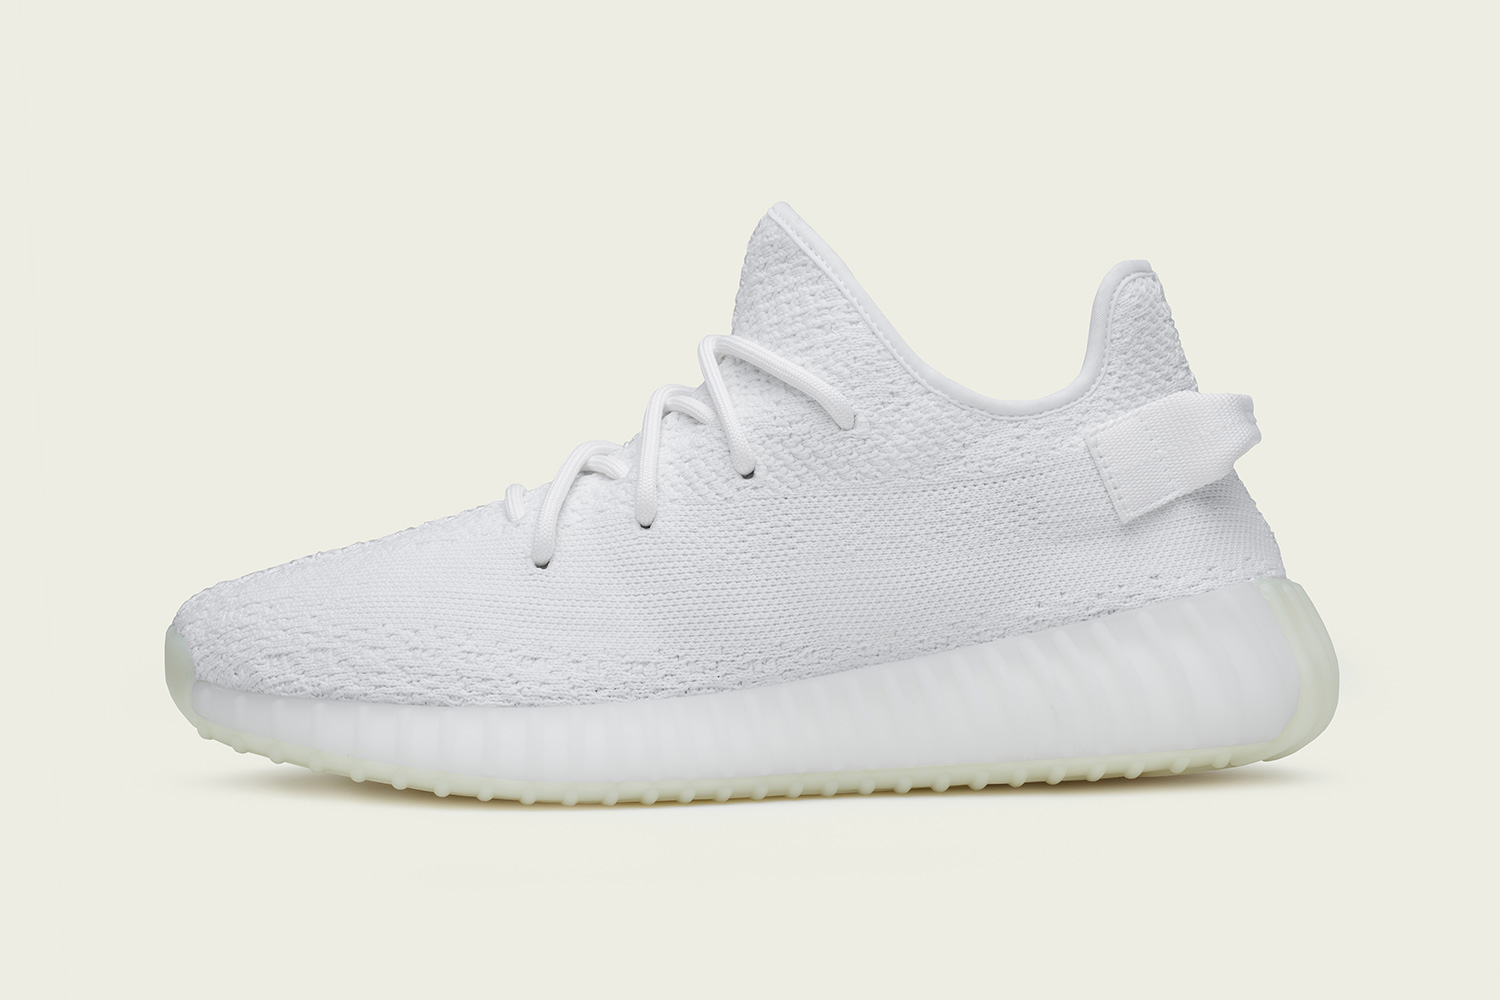 Adidas Yeezy Boost 350 'Tan' Set to Release: What's Your